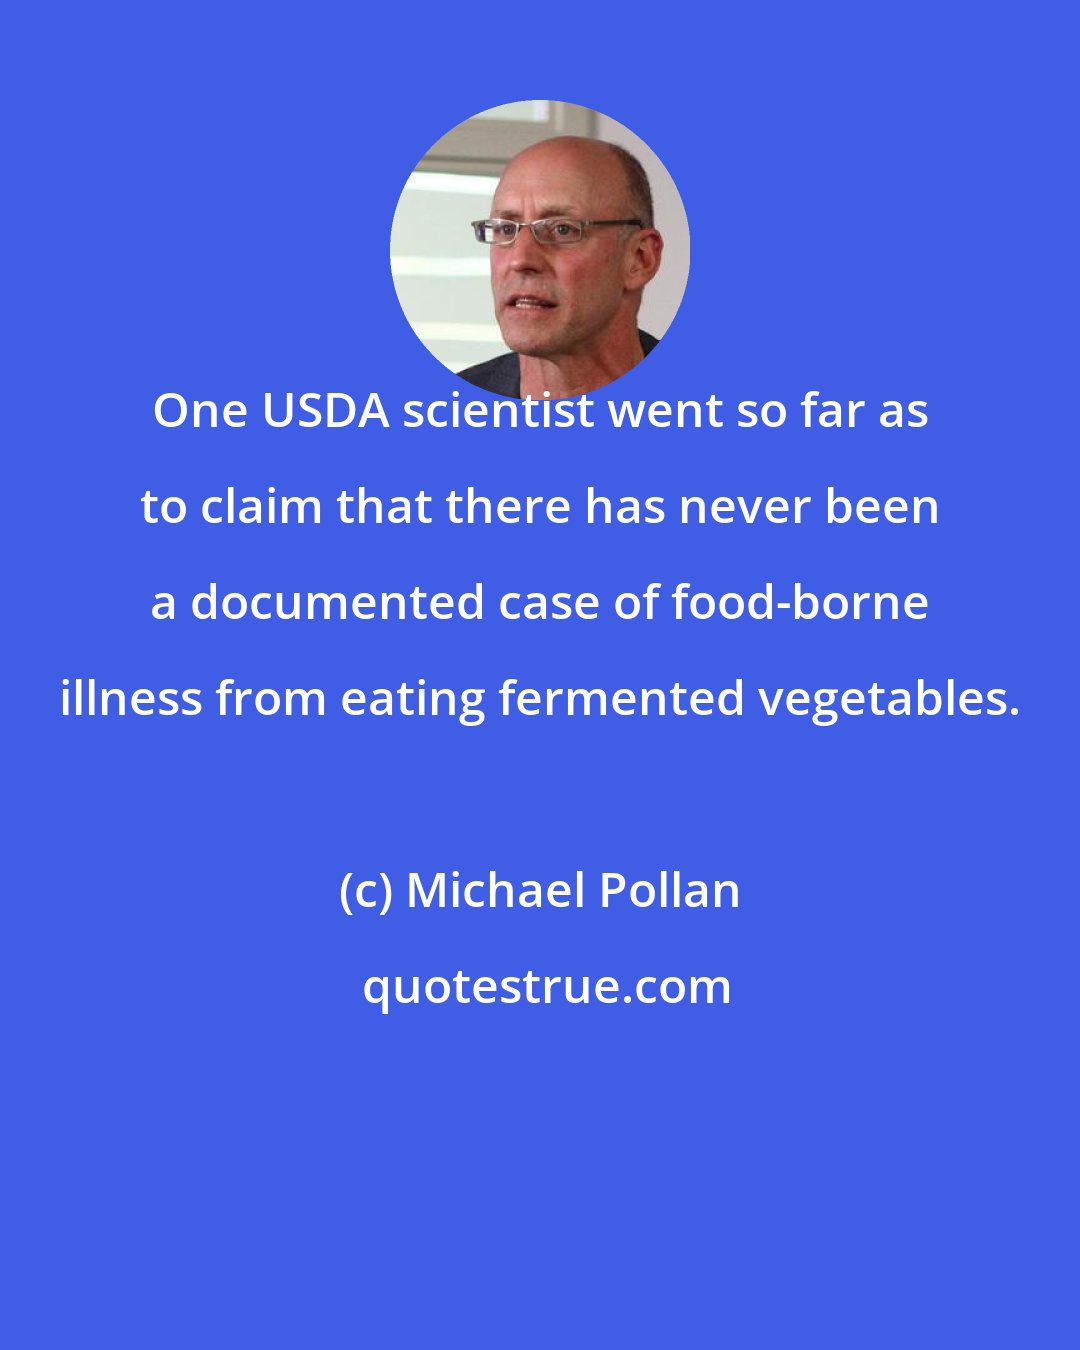 Michael Pollan: One USDA scientist went so far as to claim that there has never been a documented case of food-borne illness from eating fermented vegetables.